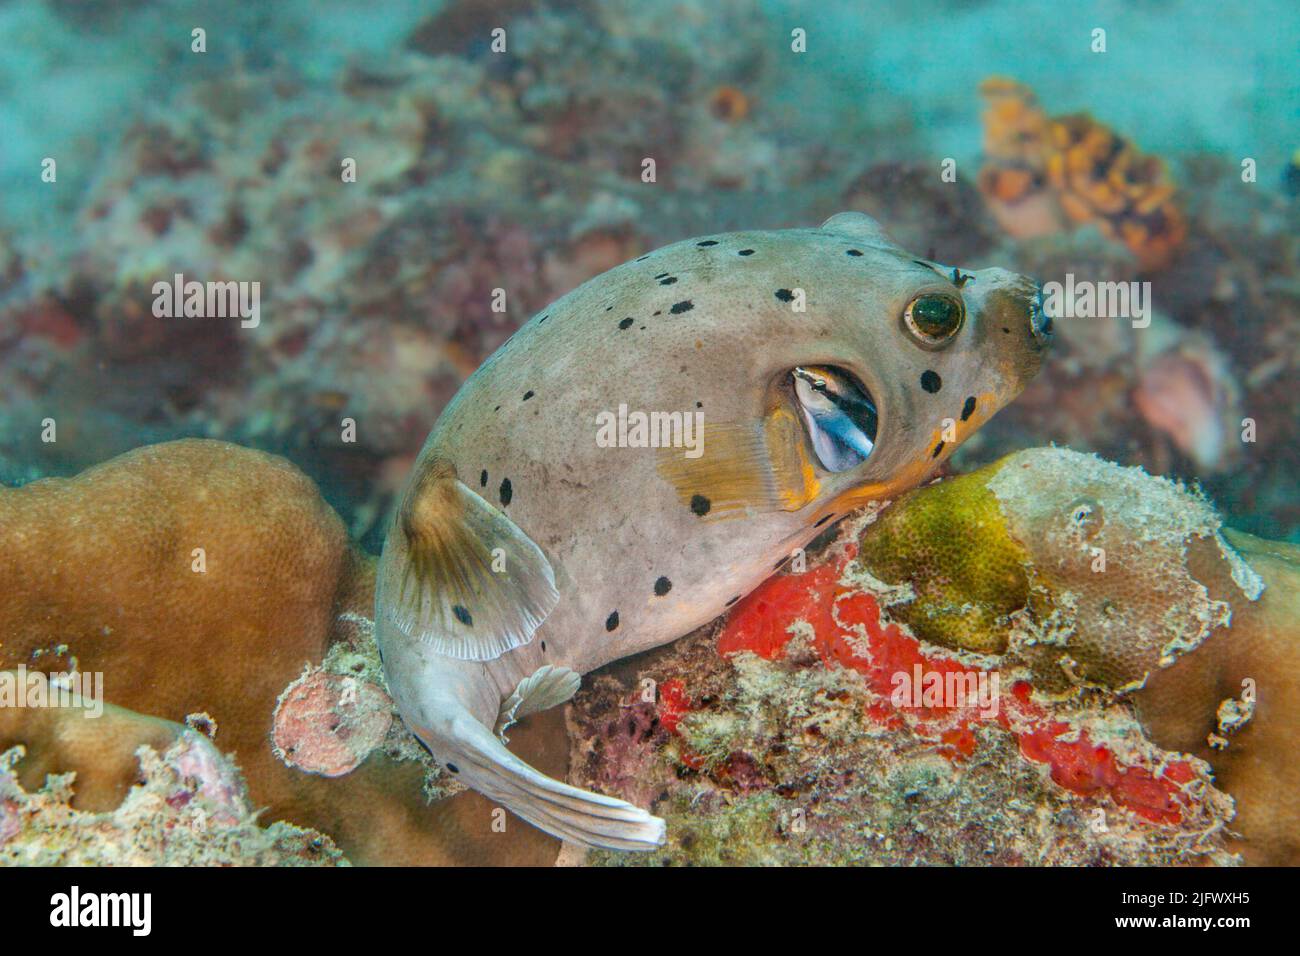 A blackspotted puffer or dog-faced puffer, Arothron nigropunctatus, Malaysia. Here it is getting its gills meticulously inspected by a cleaner wrasse, Stock Photo